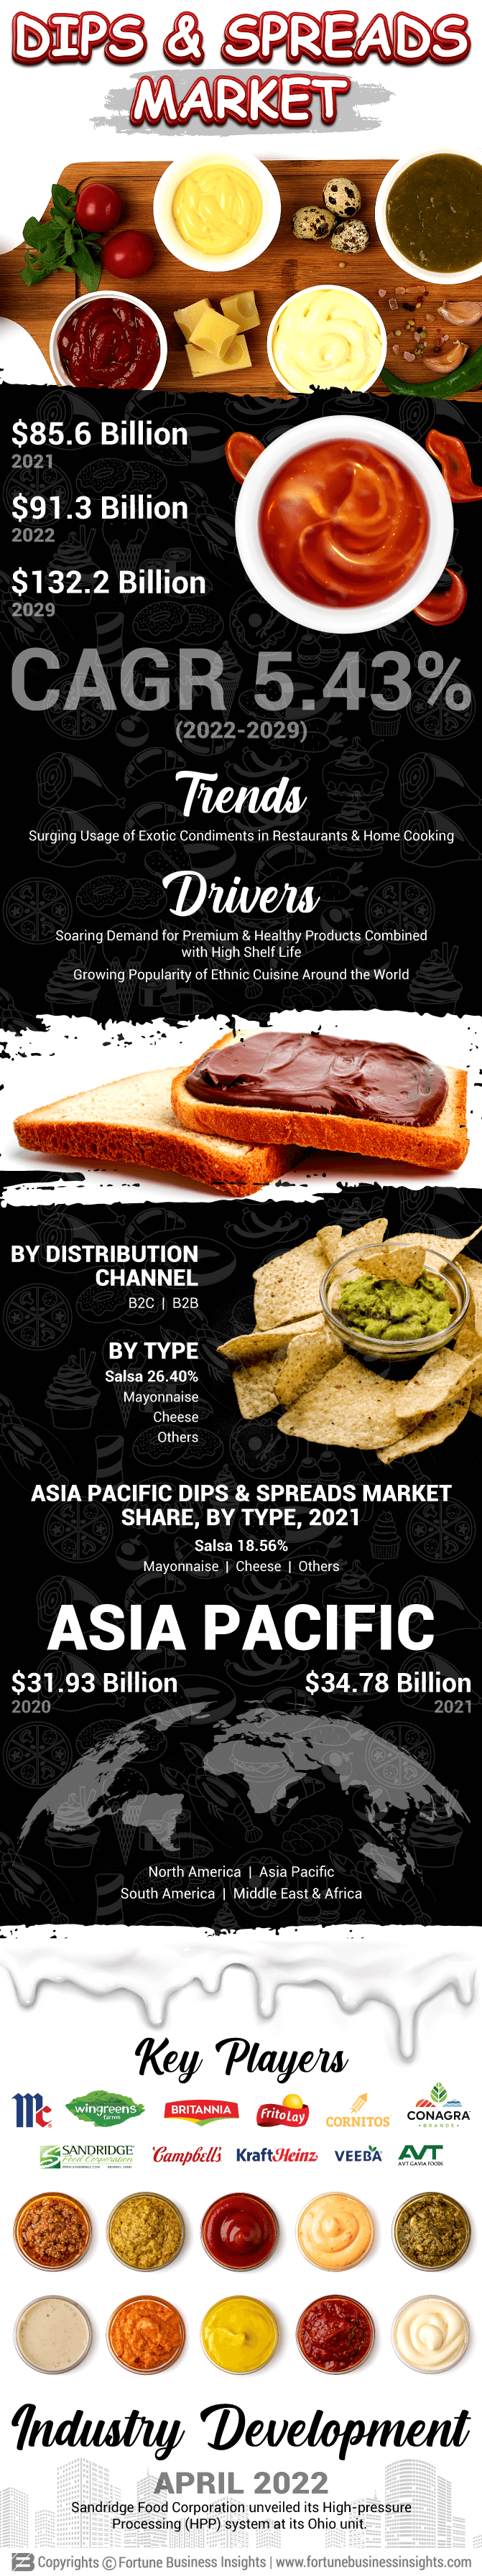 Dips and Spreads Market